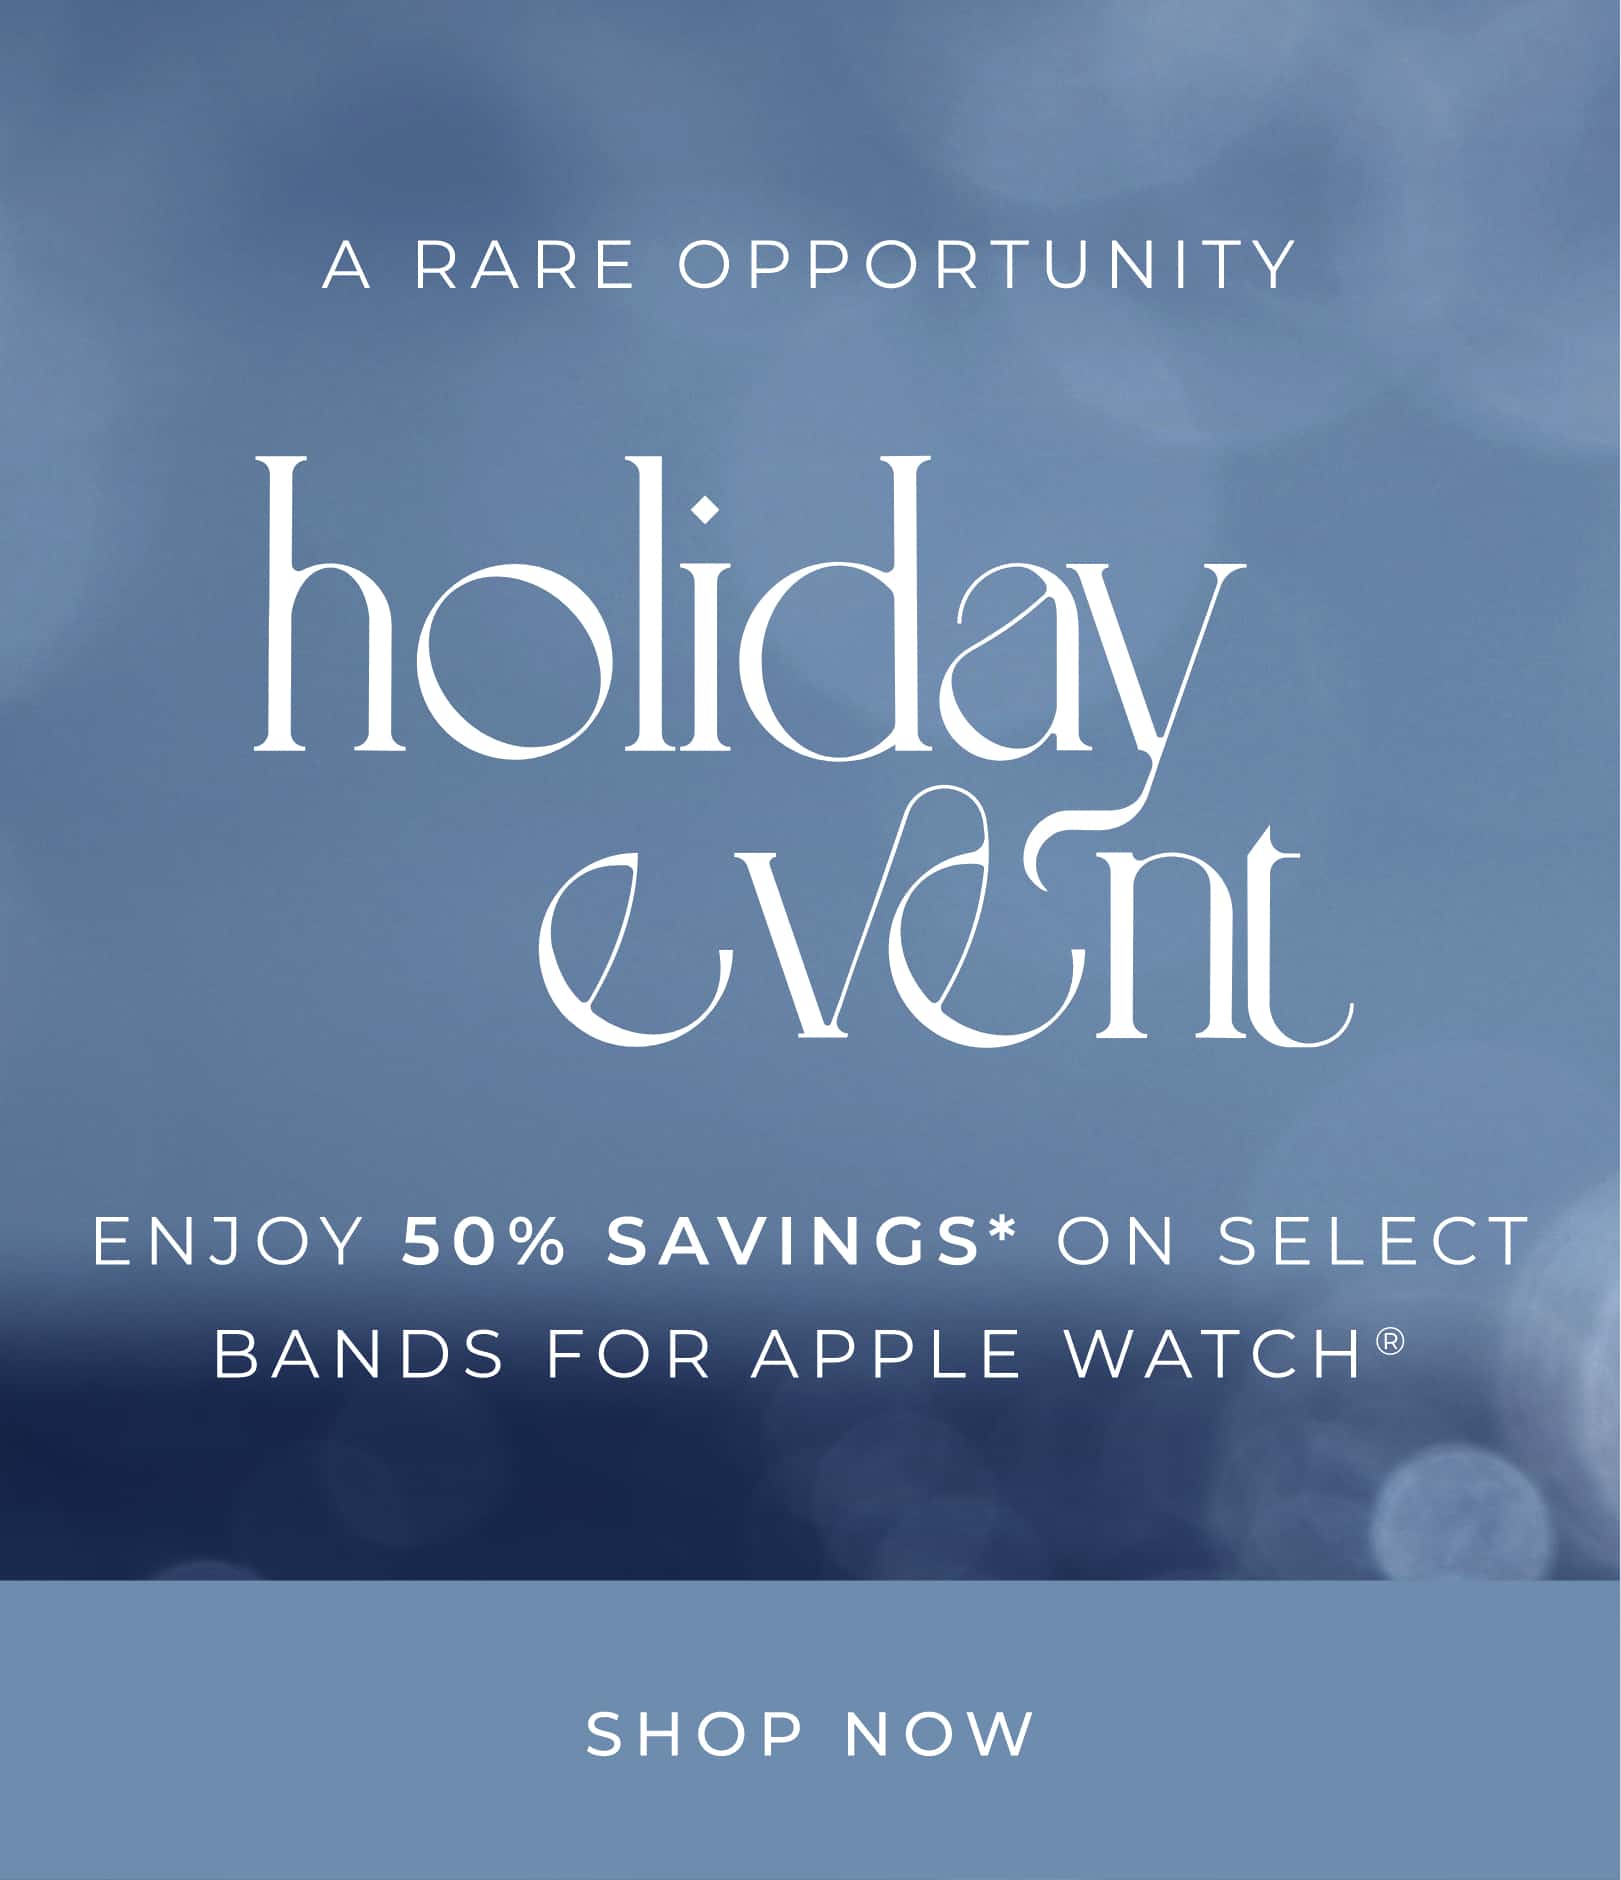 ENJOY 50% SAVINGS ON SELECT BANDS FOR APPLE WATCH®